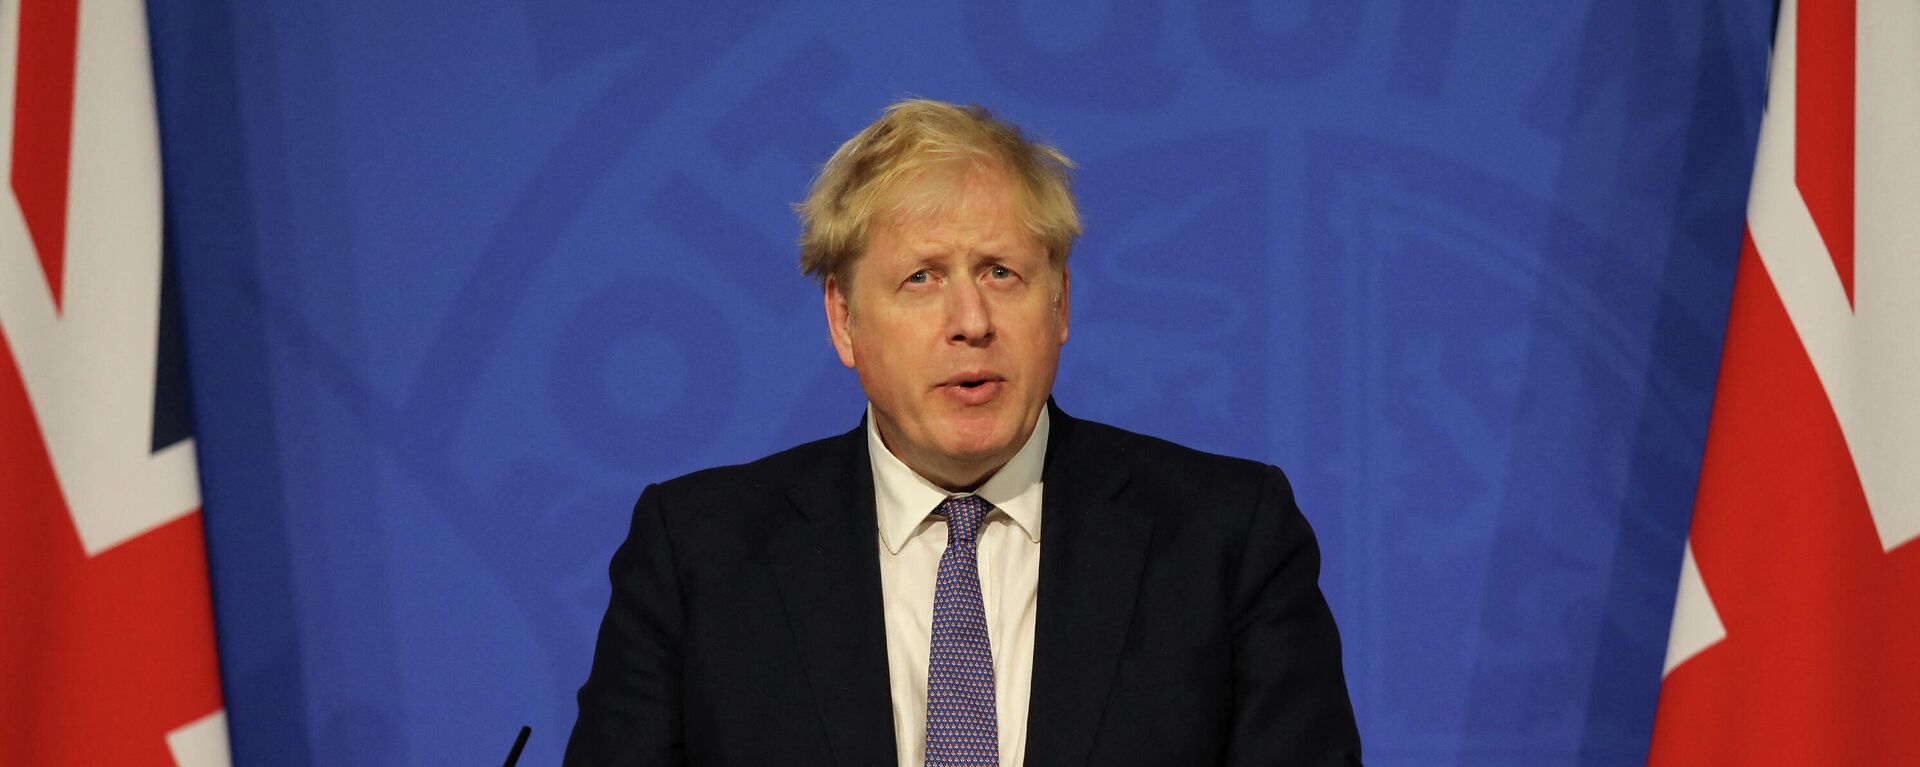 Britain's Prime Minister Boris Johnson speaks during a virtual press conference to update the nation on the status of the Covid-19 pandemic, in the Downing Street briefing room in central London on January 4, 2022. - Sputnik International, 1920, 08.01.2022